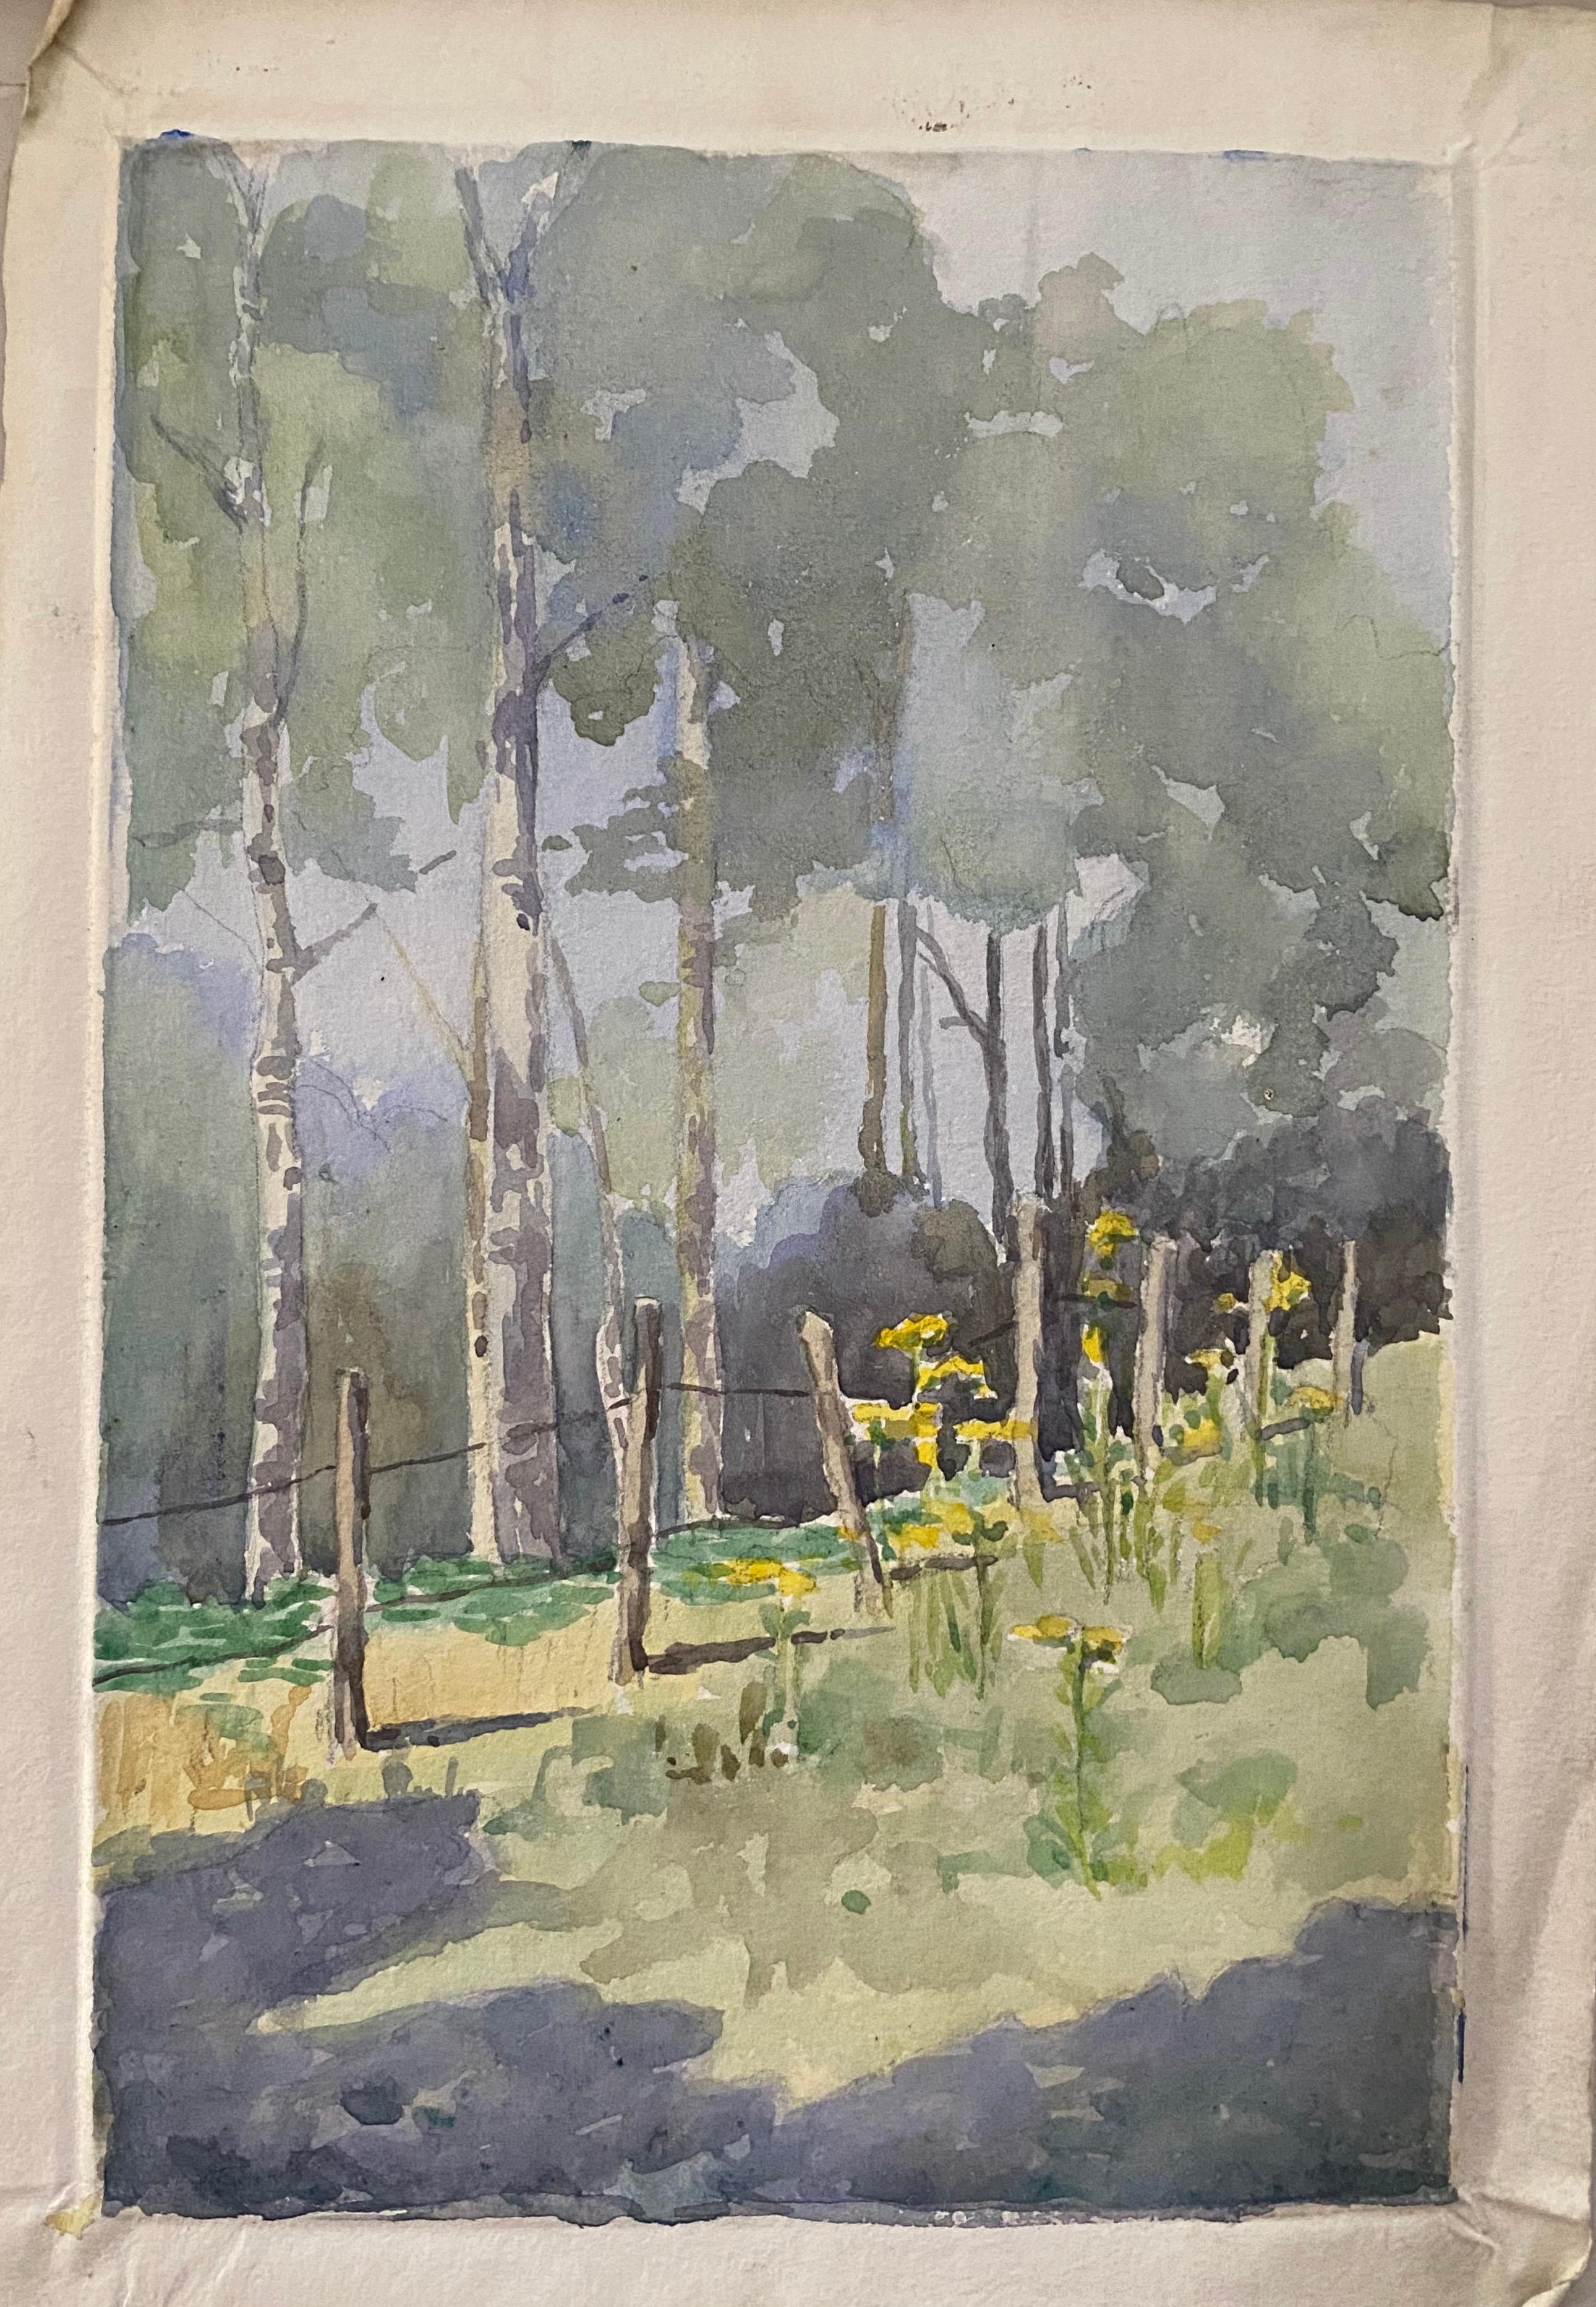 Spring Fence
English school, early 1900's
original watercolor painting on artists paper, unframed
overall paper size: 11 x 7.75 inches
Double sided 

From a large private collection of English watercolor paintings, all by the same hand, we